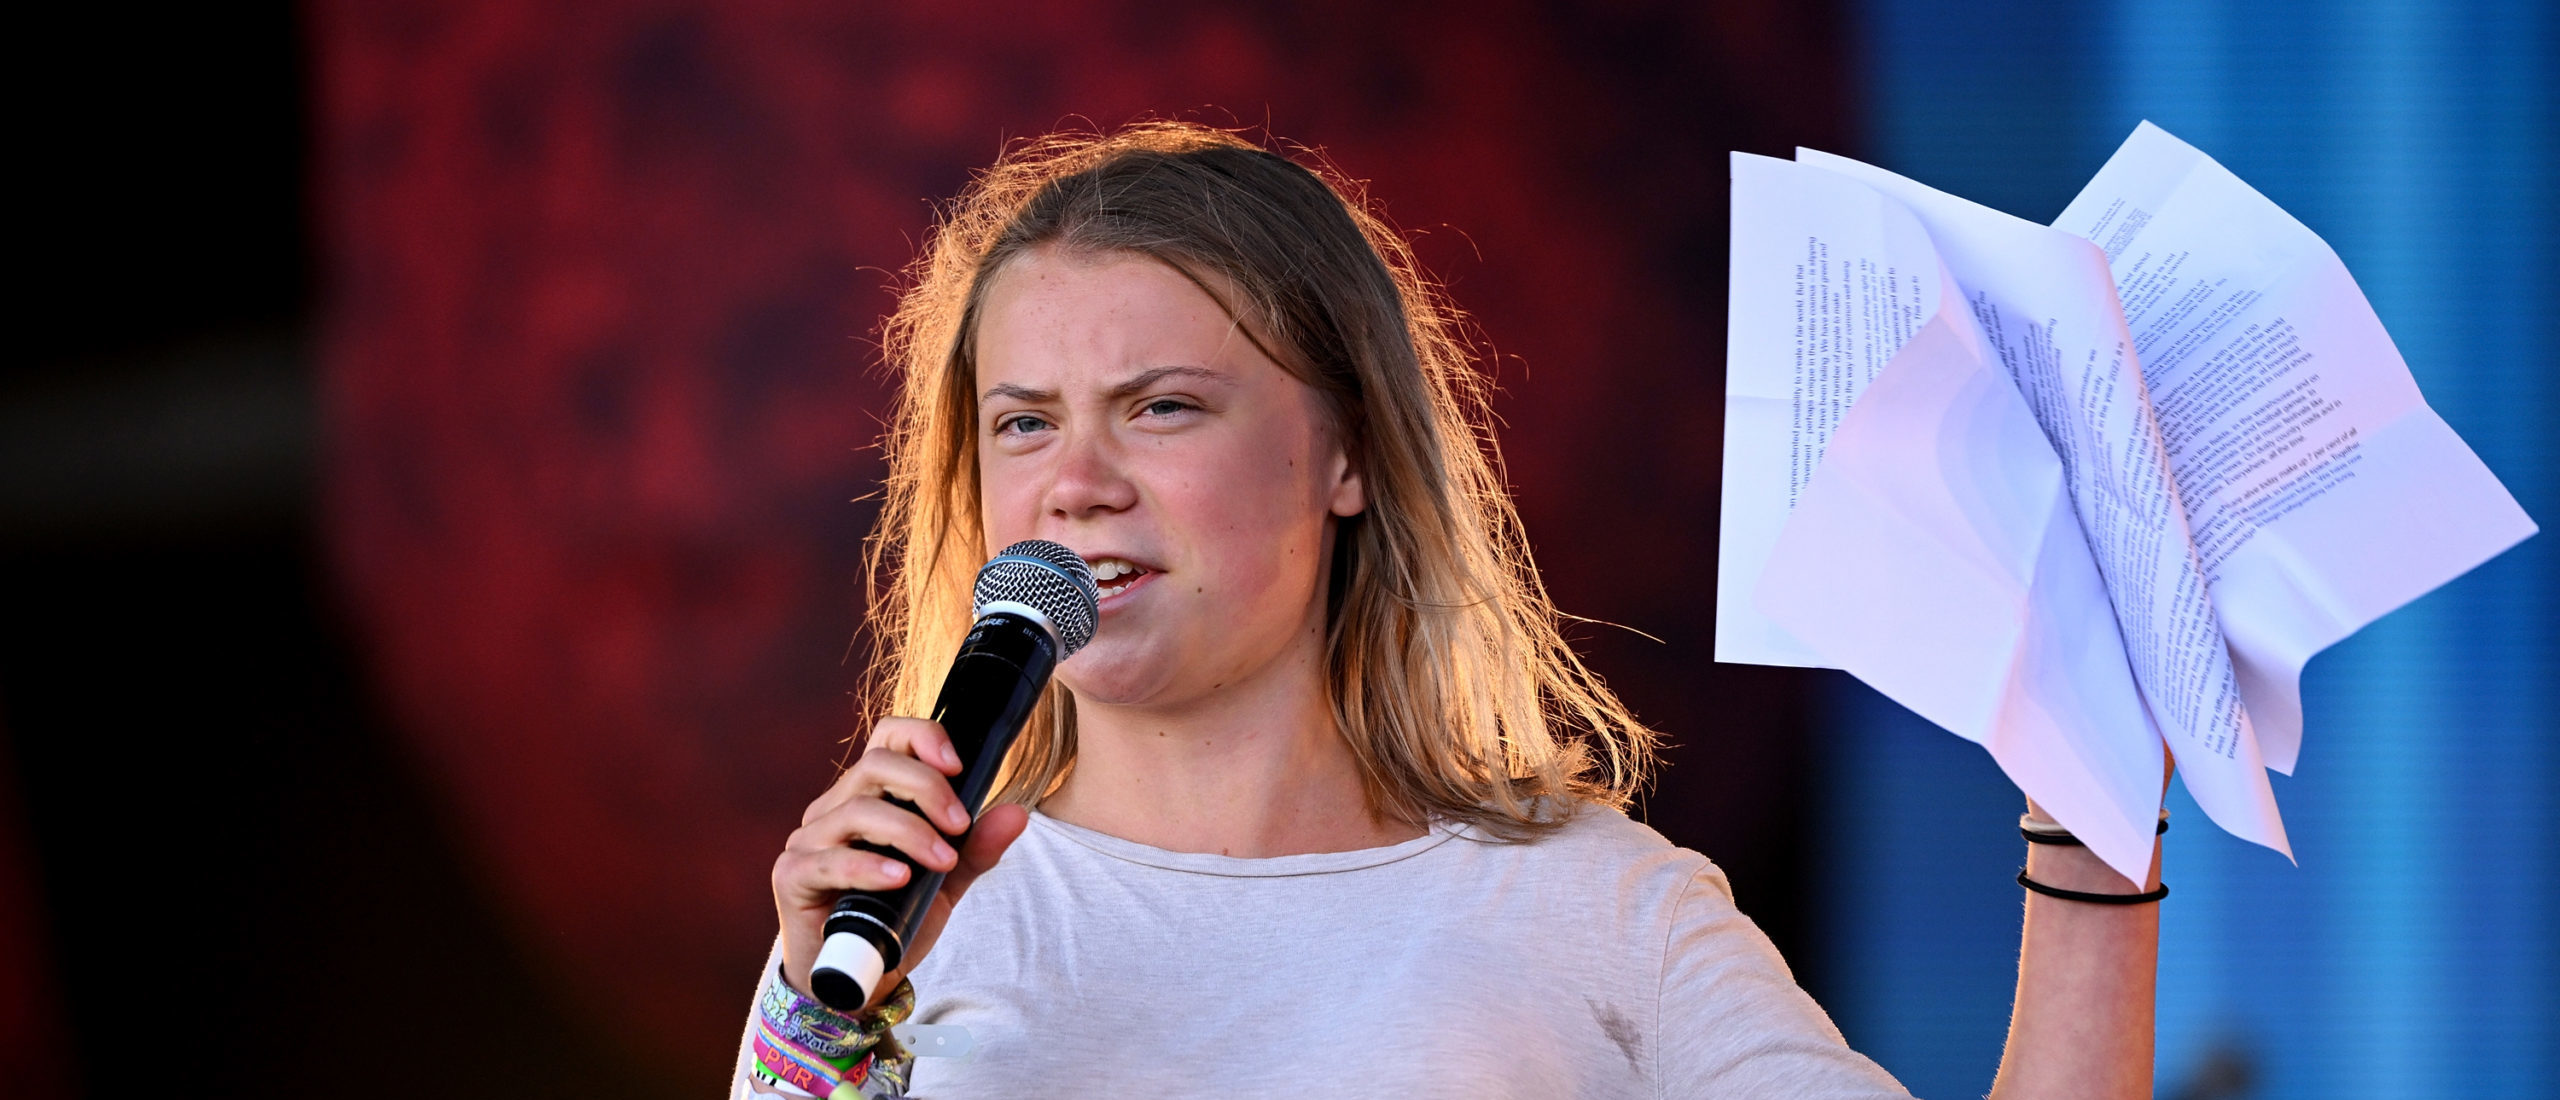 greta-thunberg-is-back-teen-activist-predicts-climate-apocalypse-during-appearance-at-music-festival